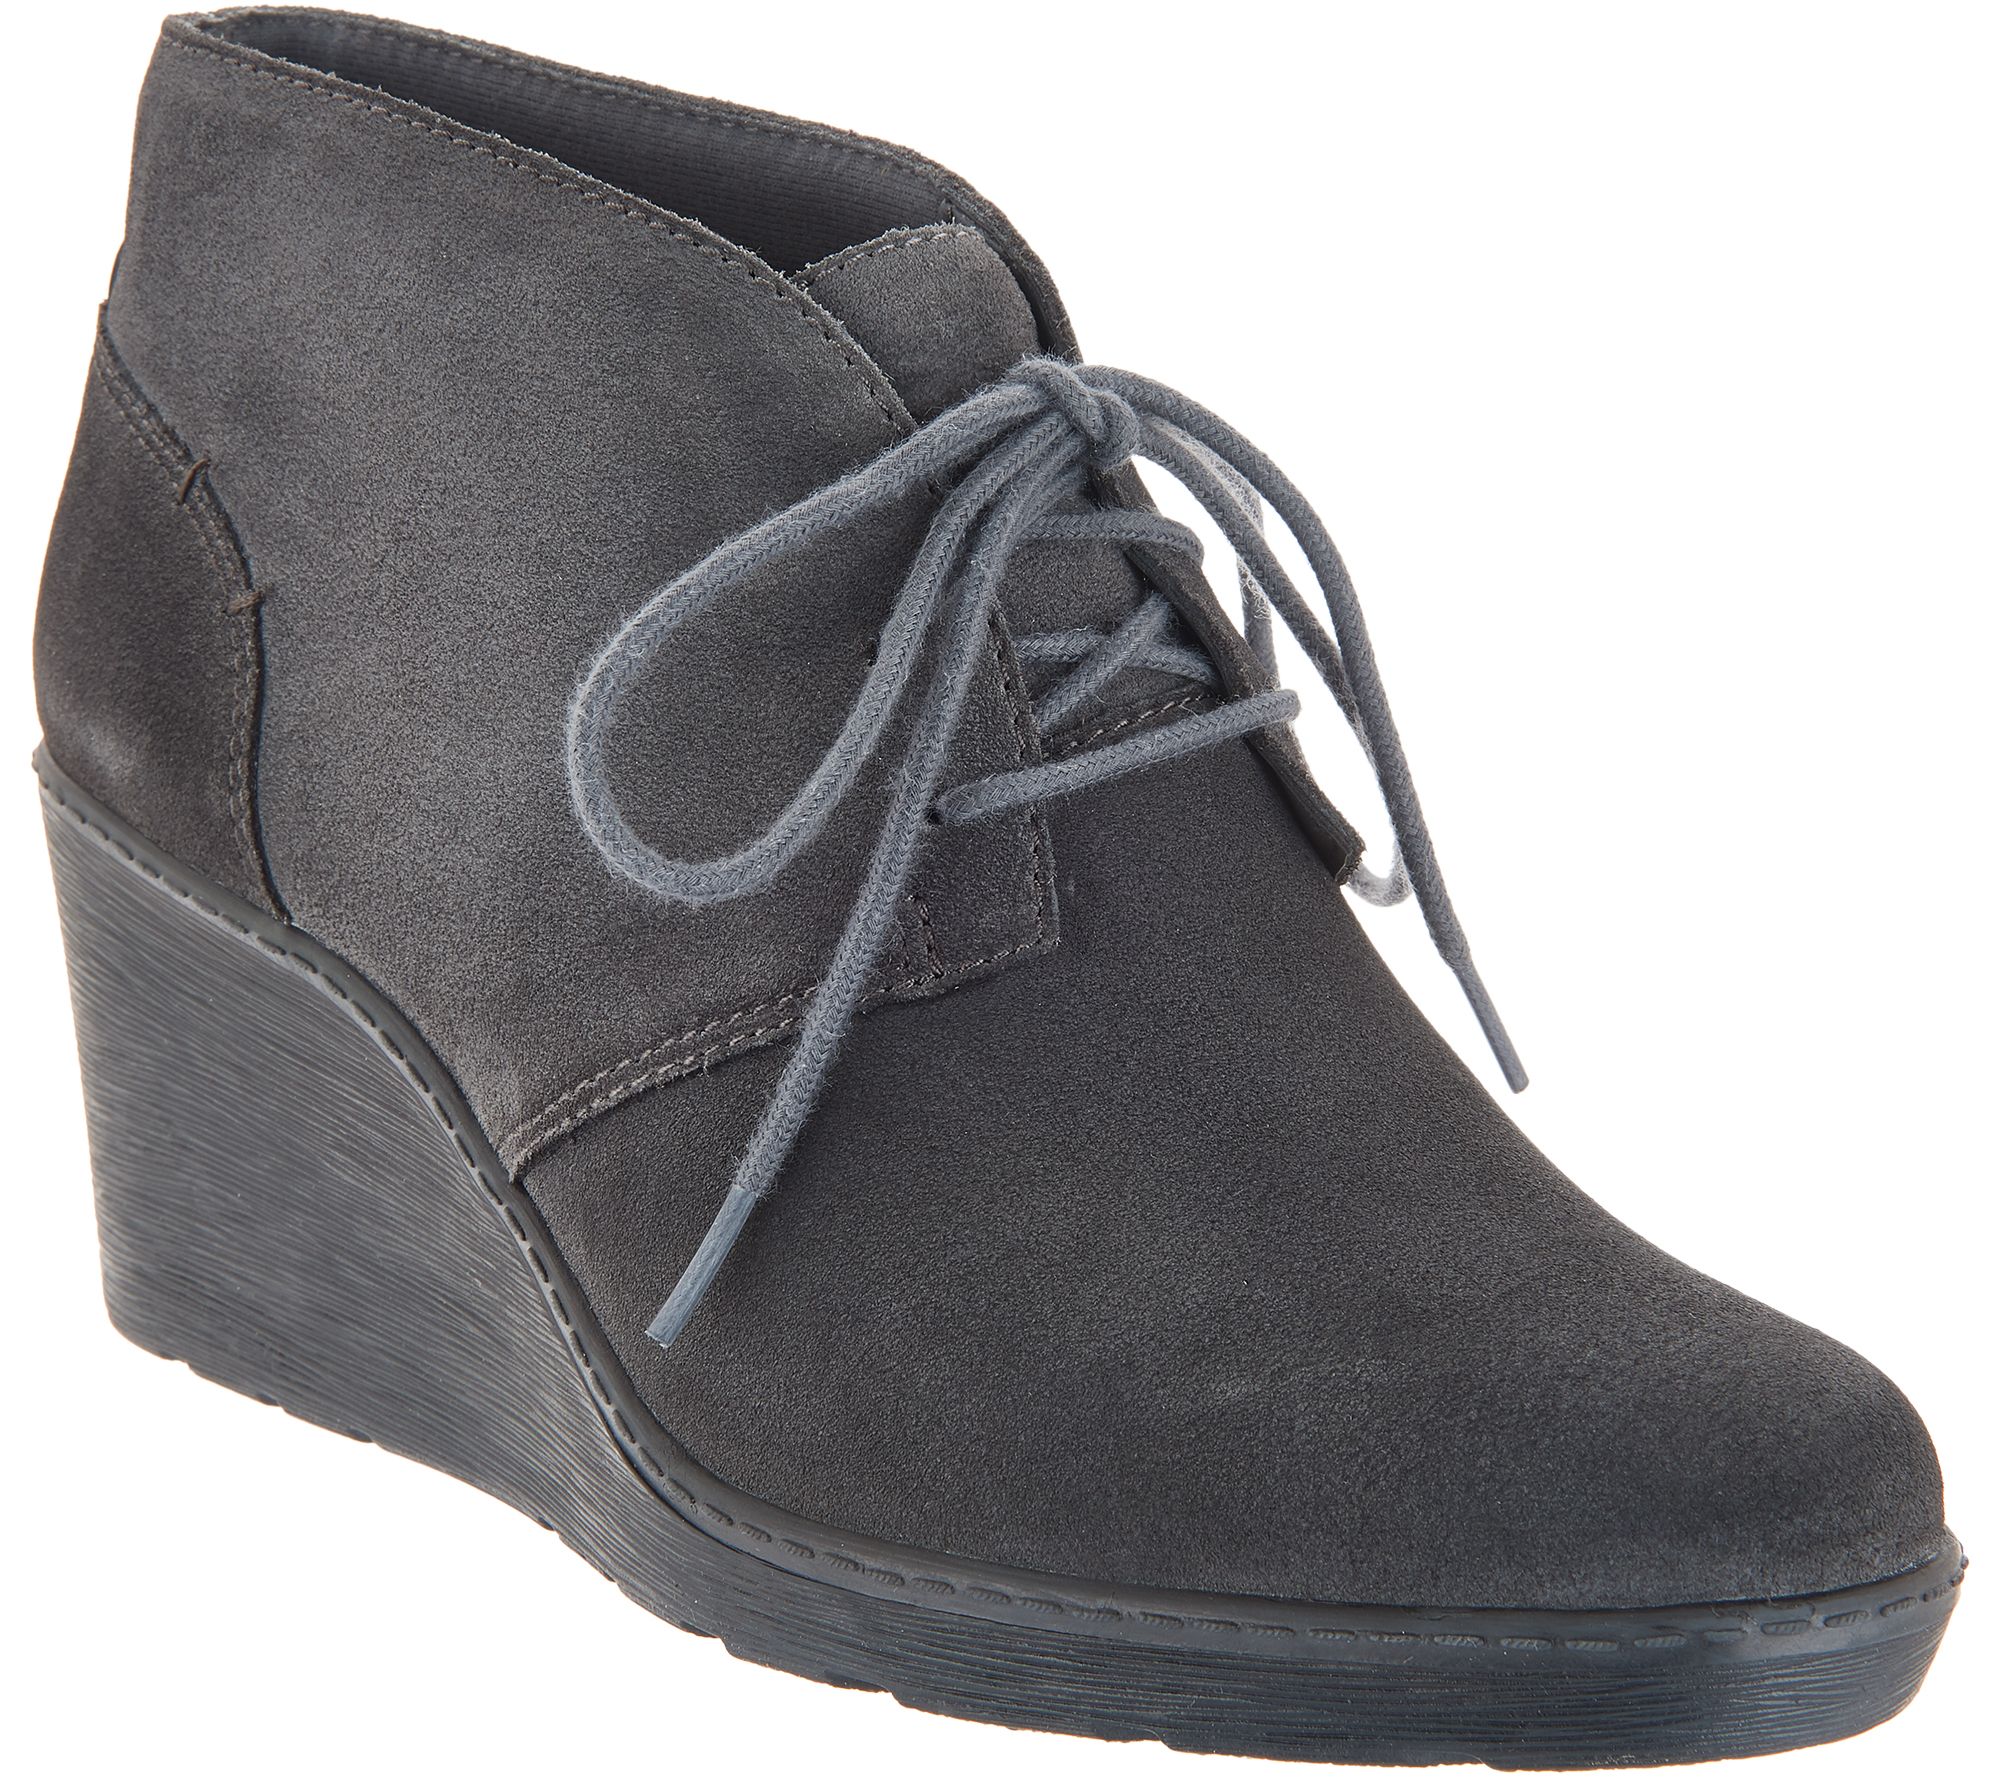 Clarks® Shoes for Women, Clarks® Women's Boots